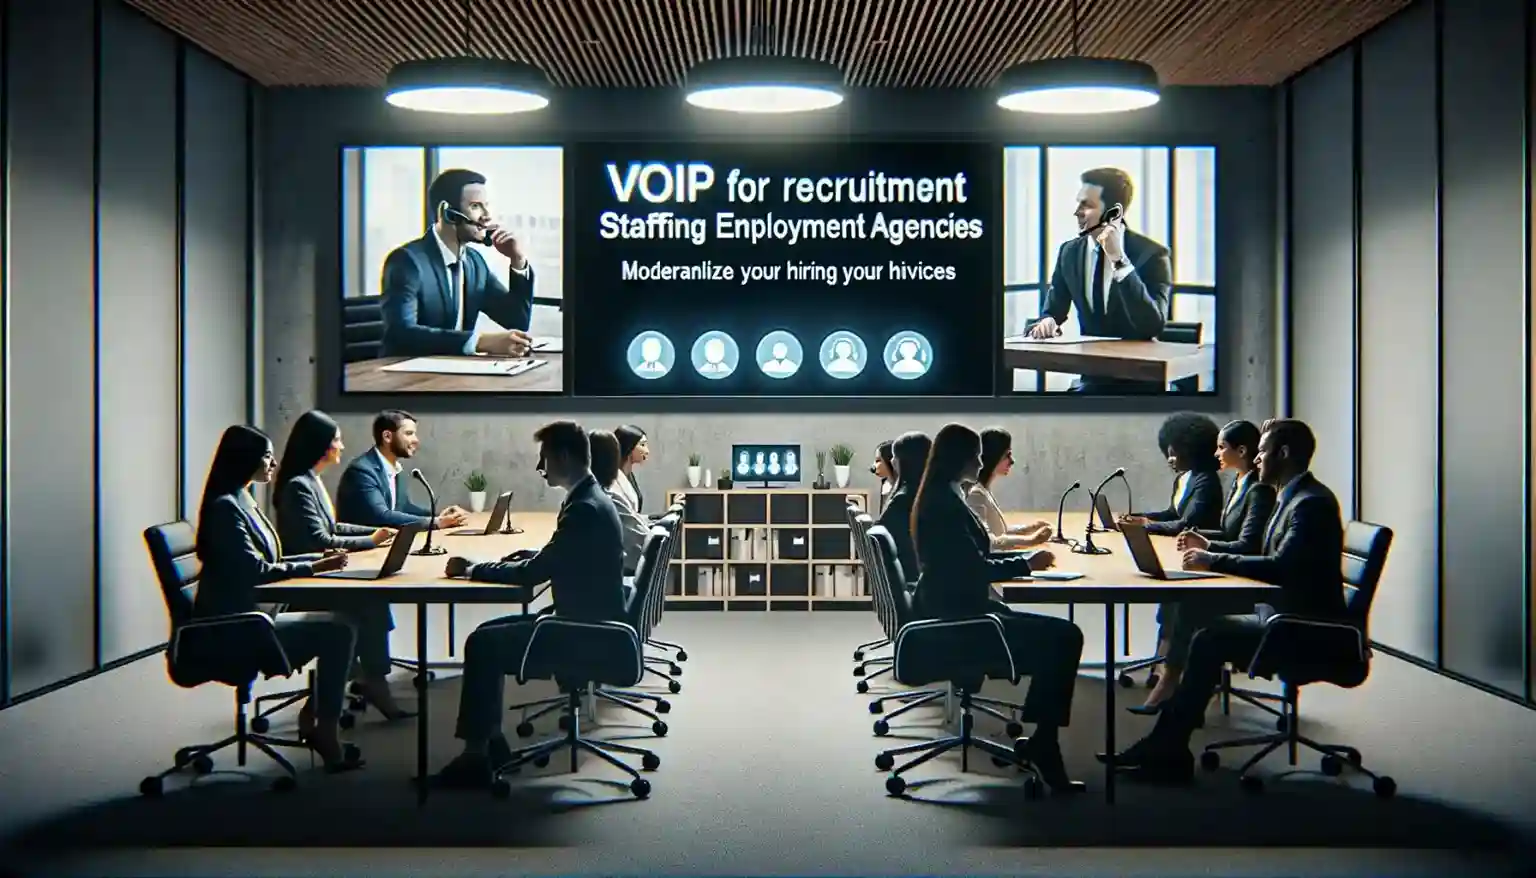 Transform Your Recruitment Process with VoIP